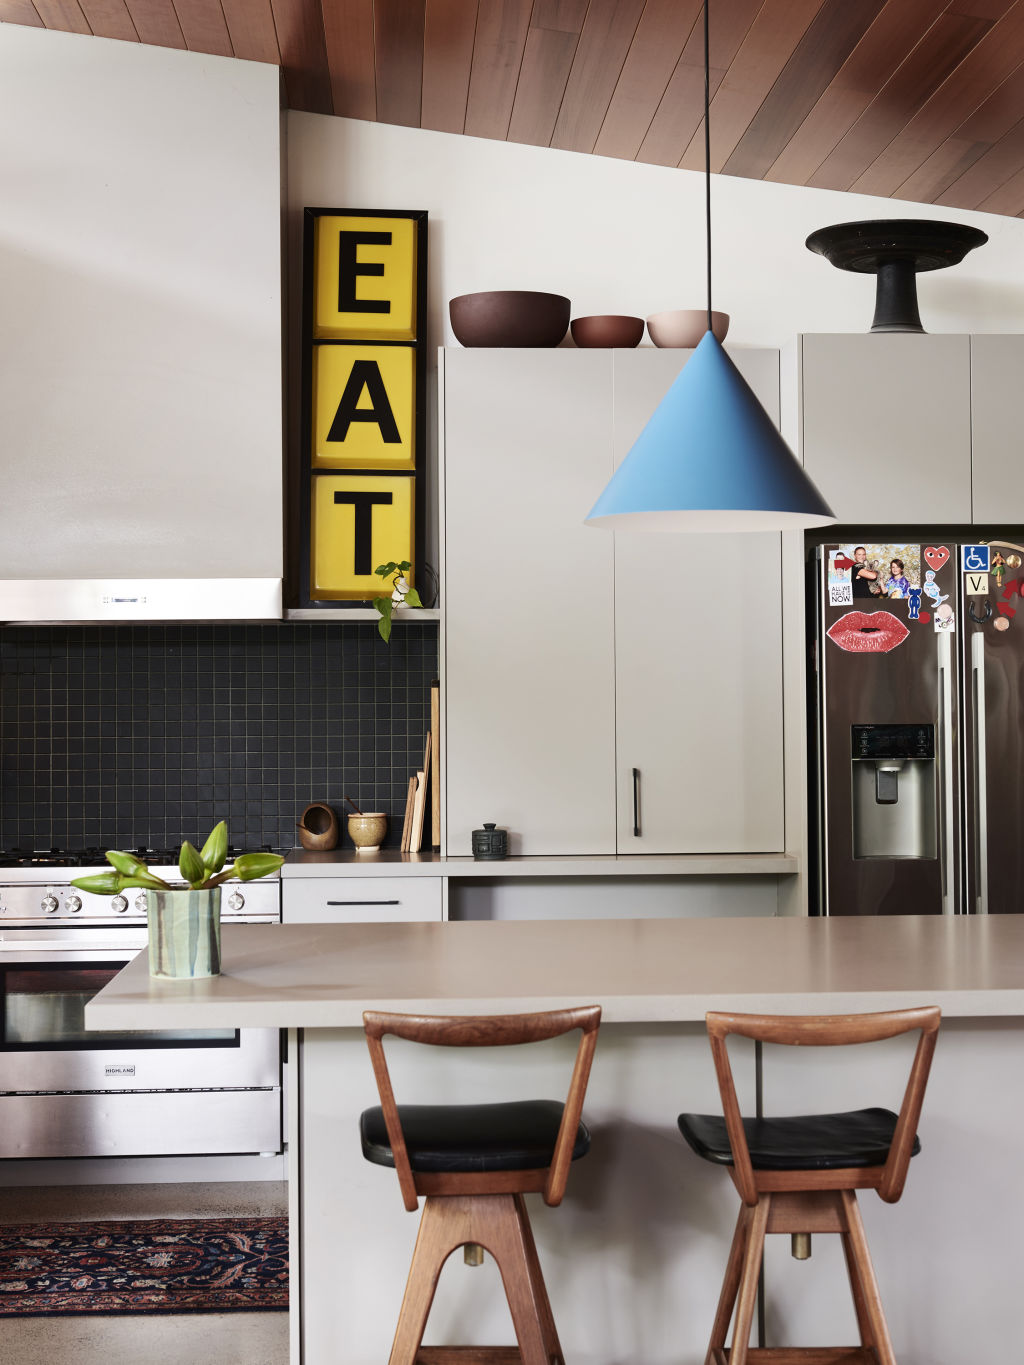 TH barstools (bought from an op-shop for $10 each).&nbsp;Nick Scali&nbsp;pendant. ‘Eat’ light-up sign bought from Facebook Marketplace.  Styling: Annie Portelli and Sarah Hendriks. Photo: Eve Wilson